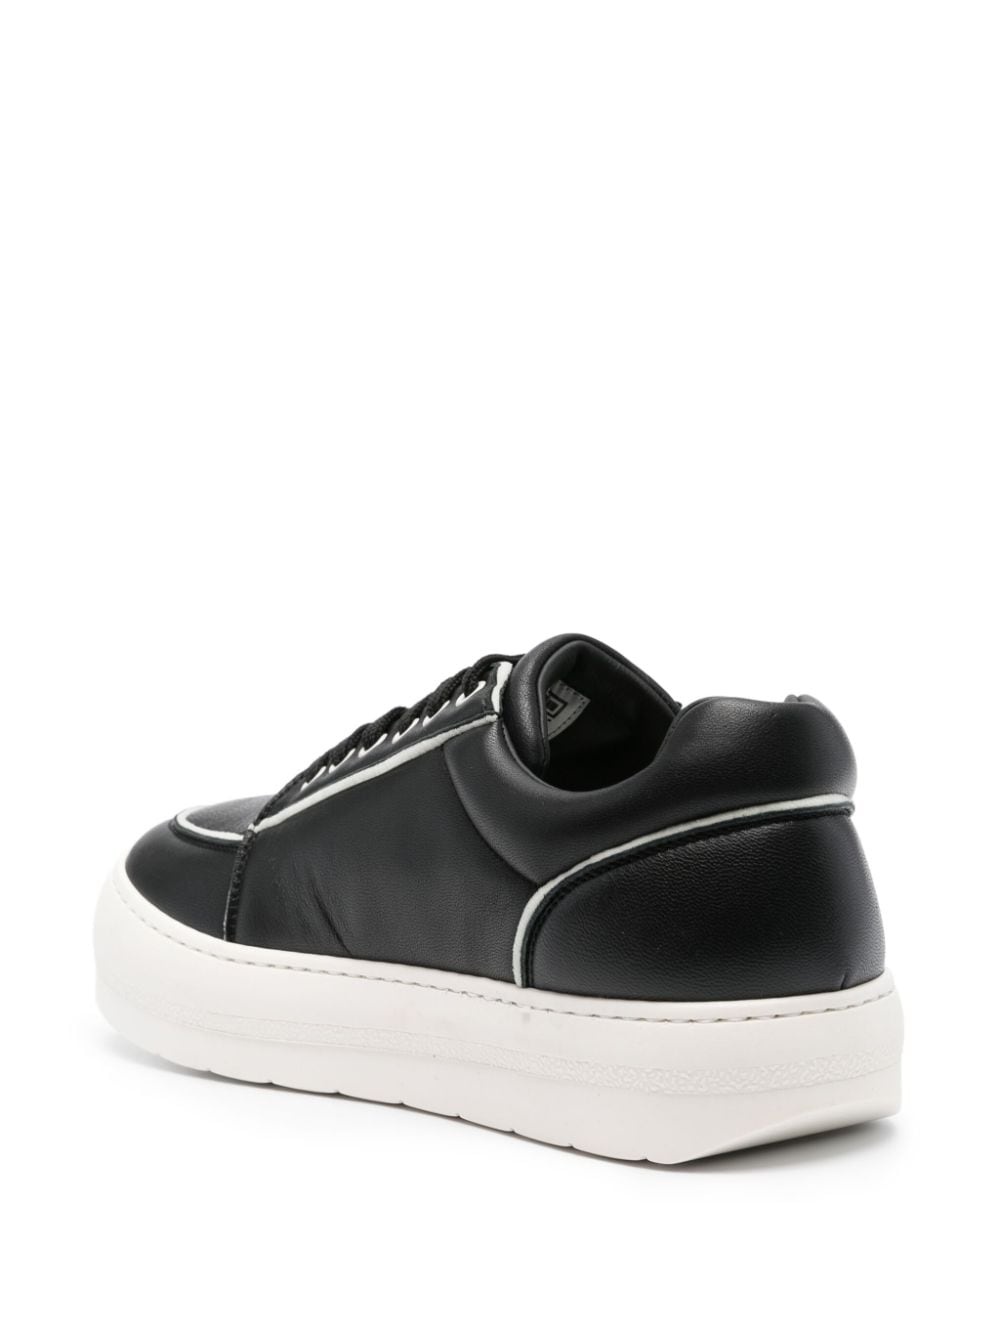 Dreamy leather flatform sneakers - 3